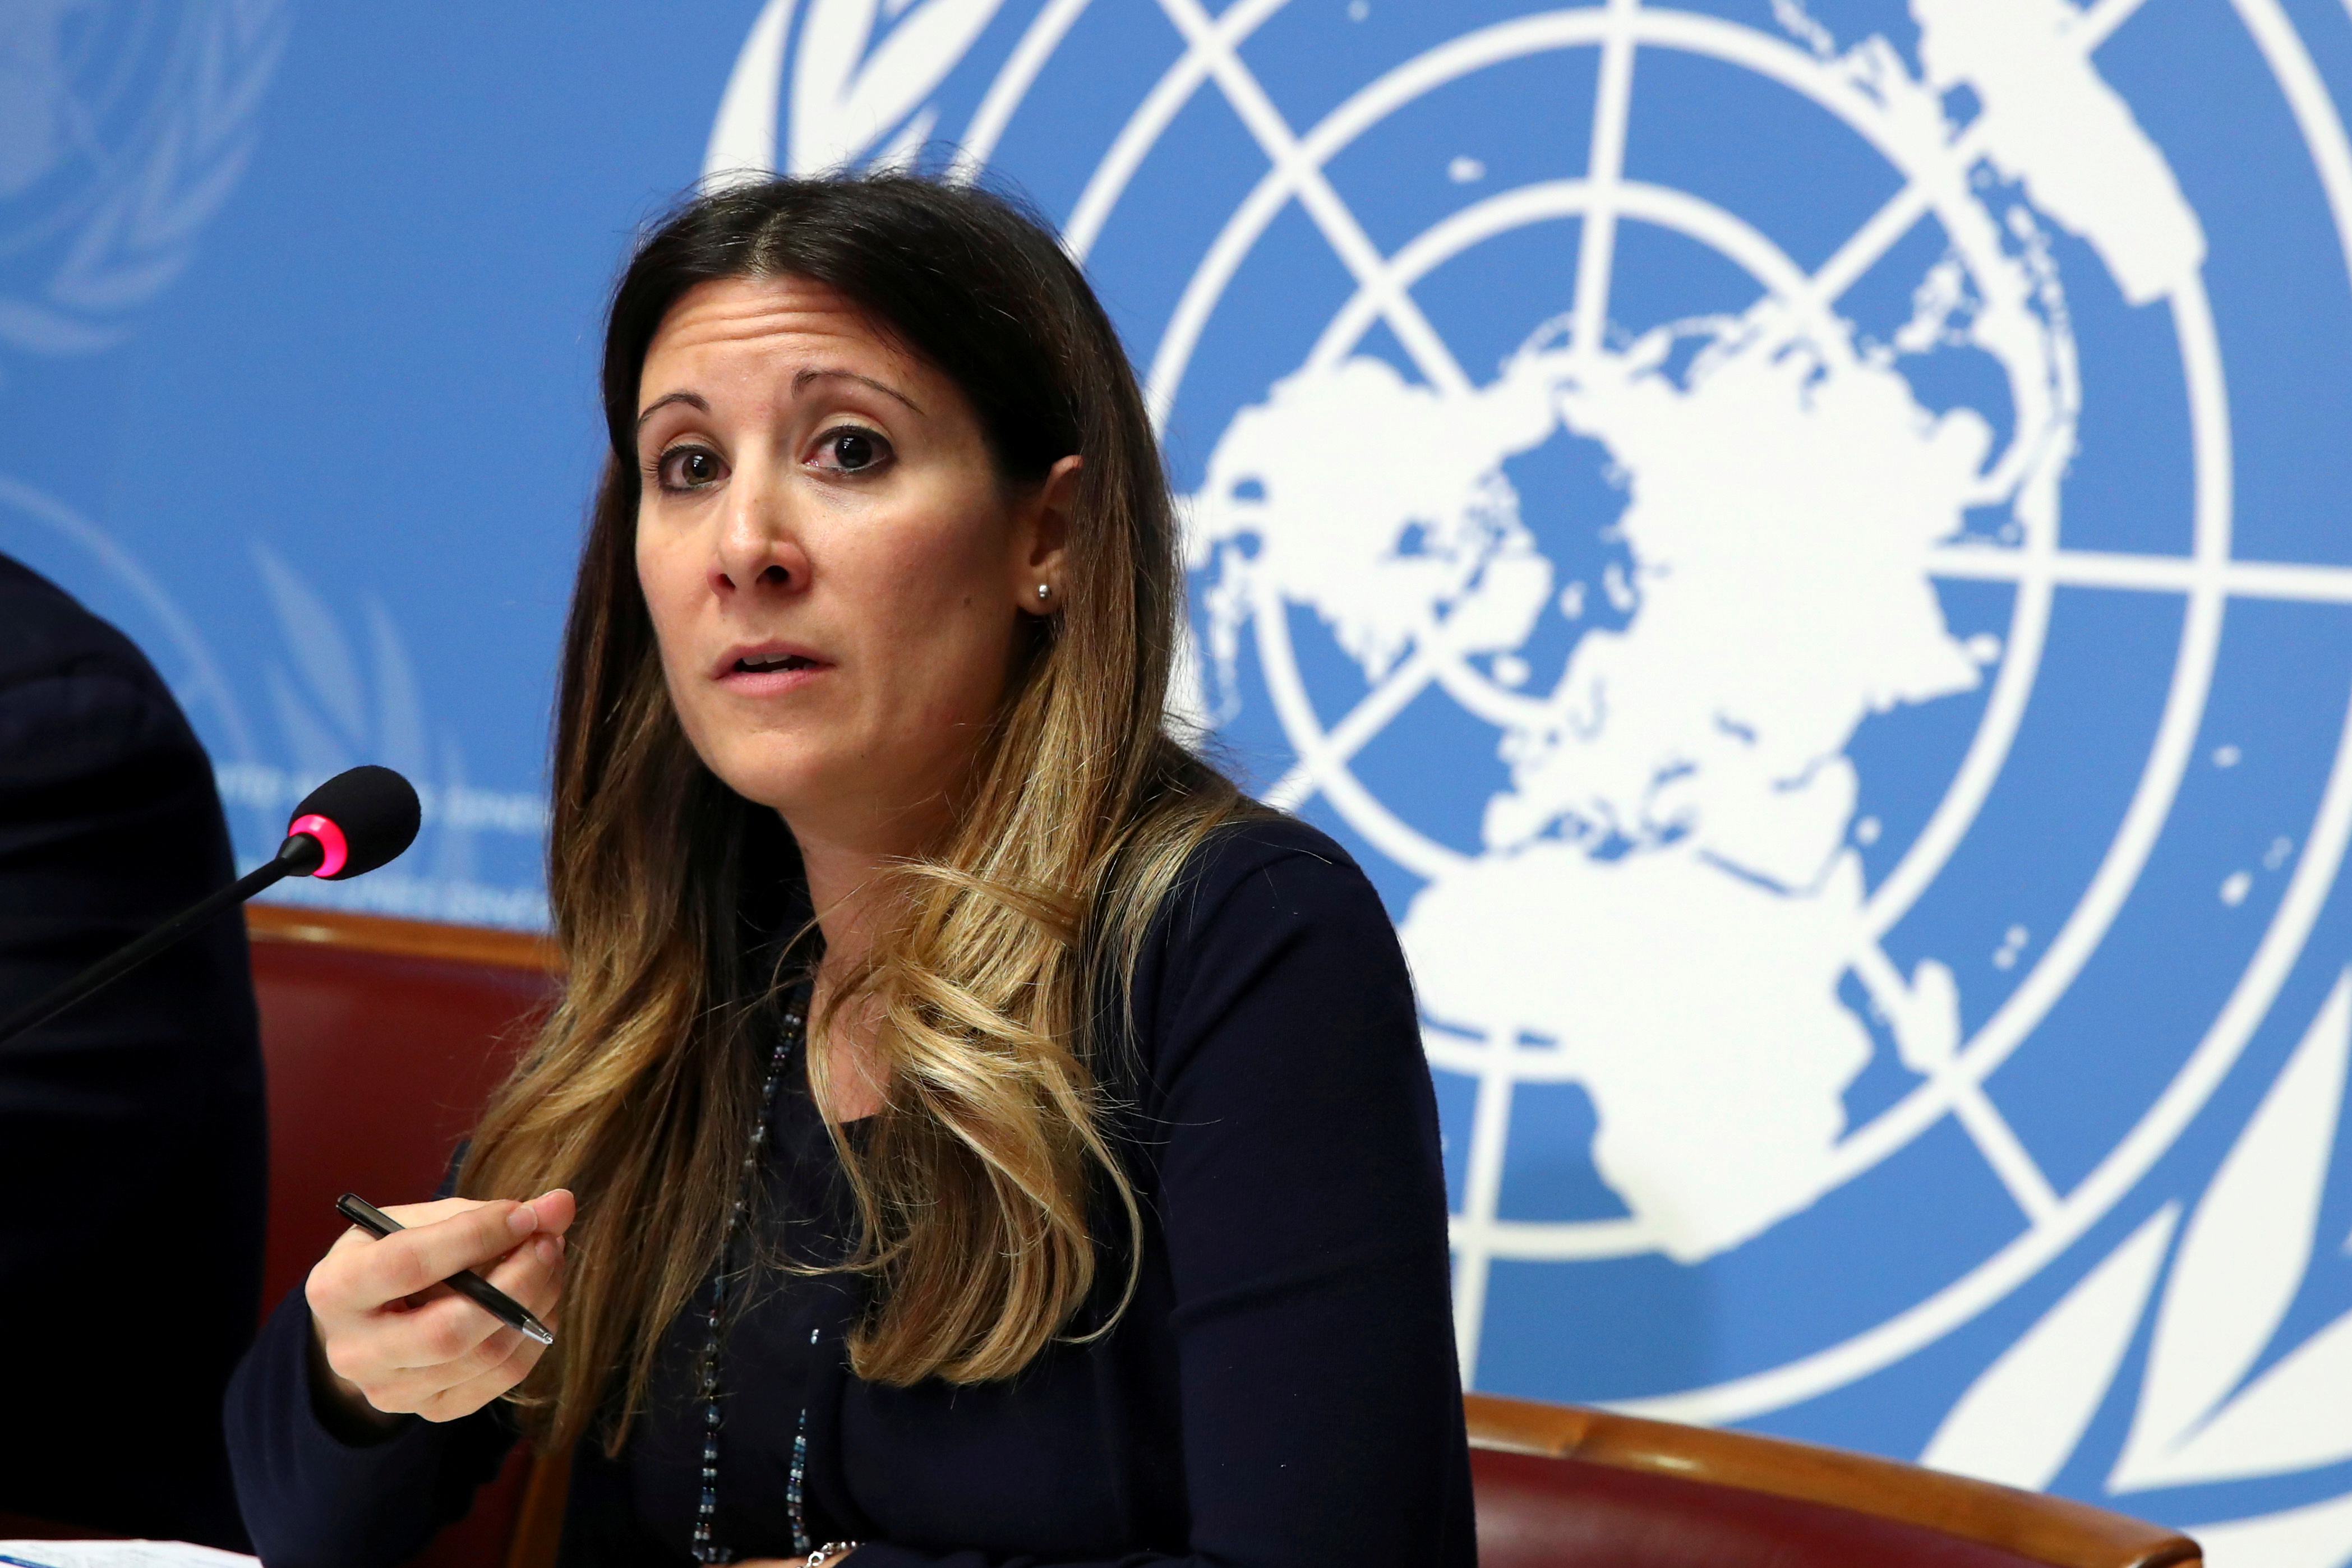 Maria Van Kerkhove, Head of Emerging Diseases and Zoonosis at the World Health Organization (WHO), speaks during a news conference on the situation of the coronavirus at the United Nations in Geneva, Switzerland, January 29, 2020. REUTERS/Denis Balibouse